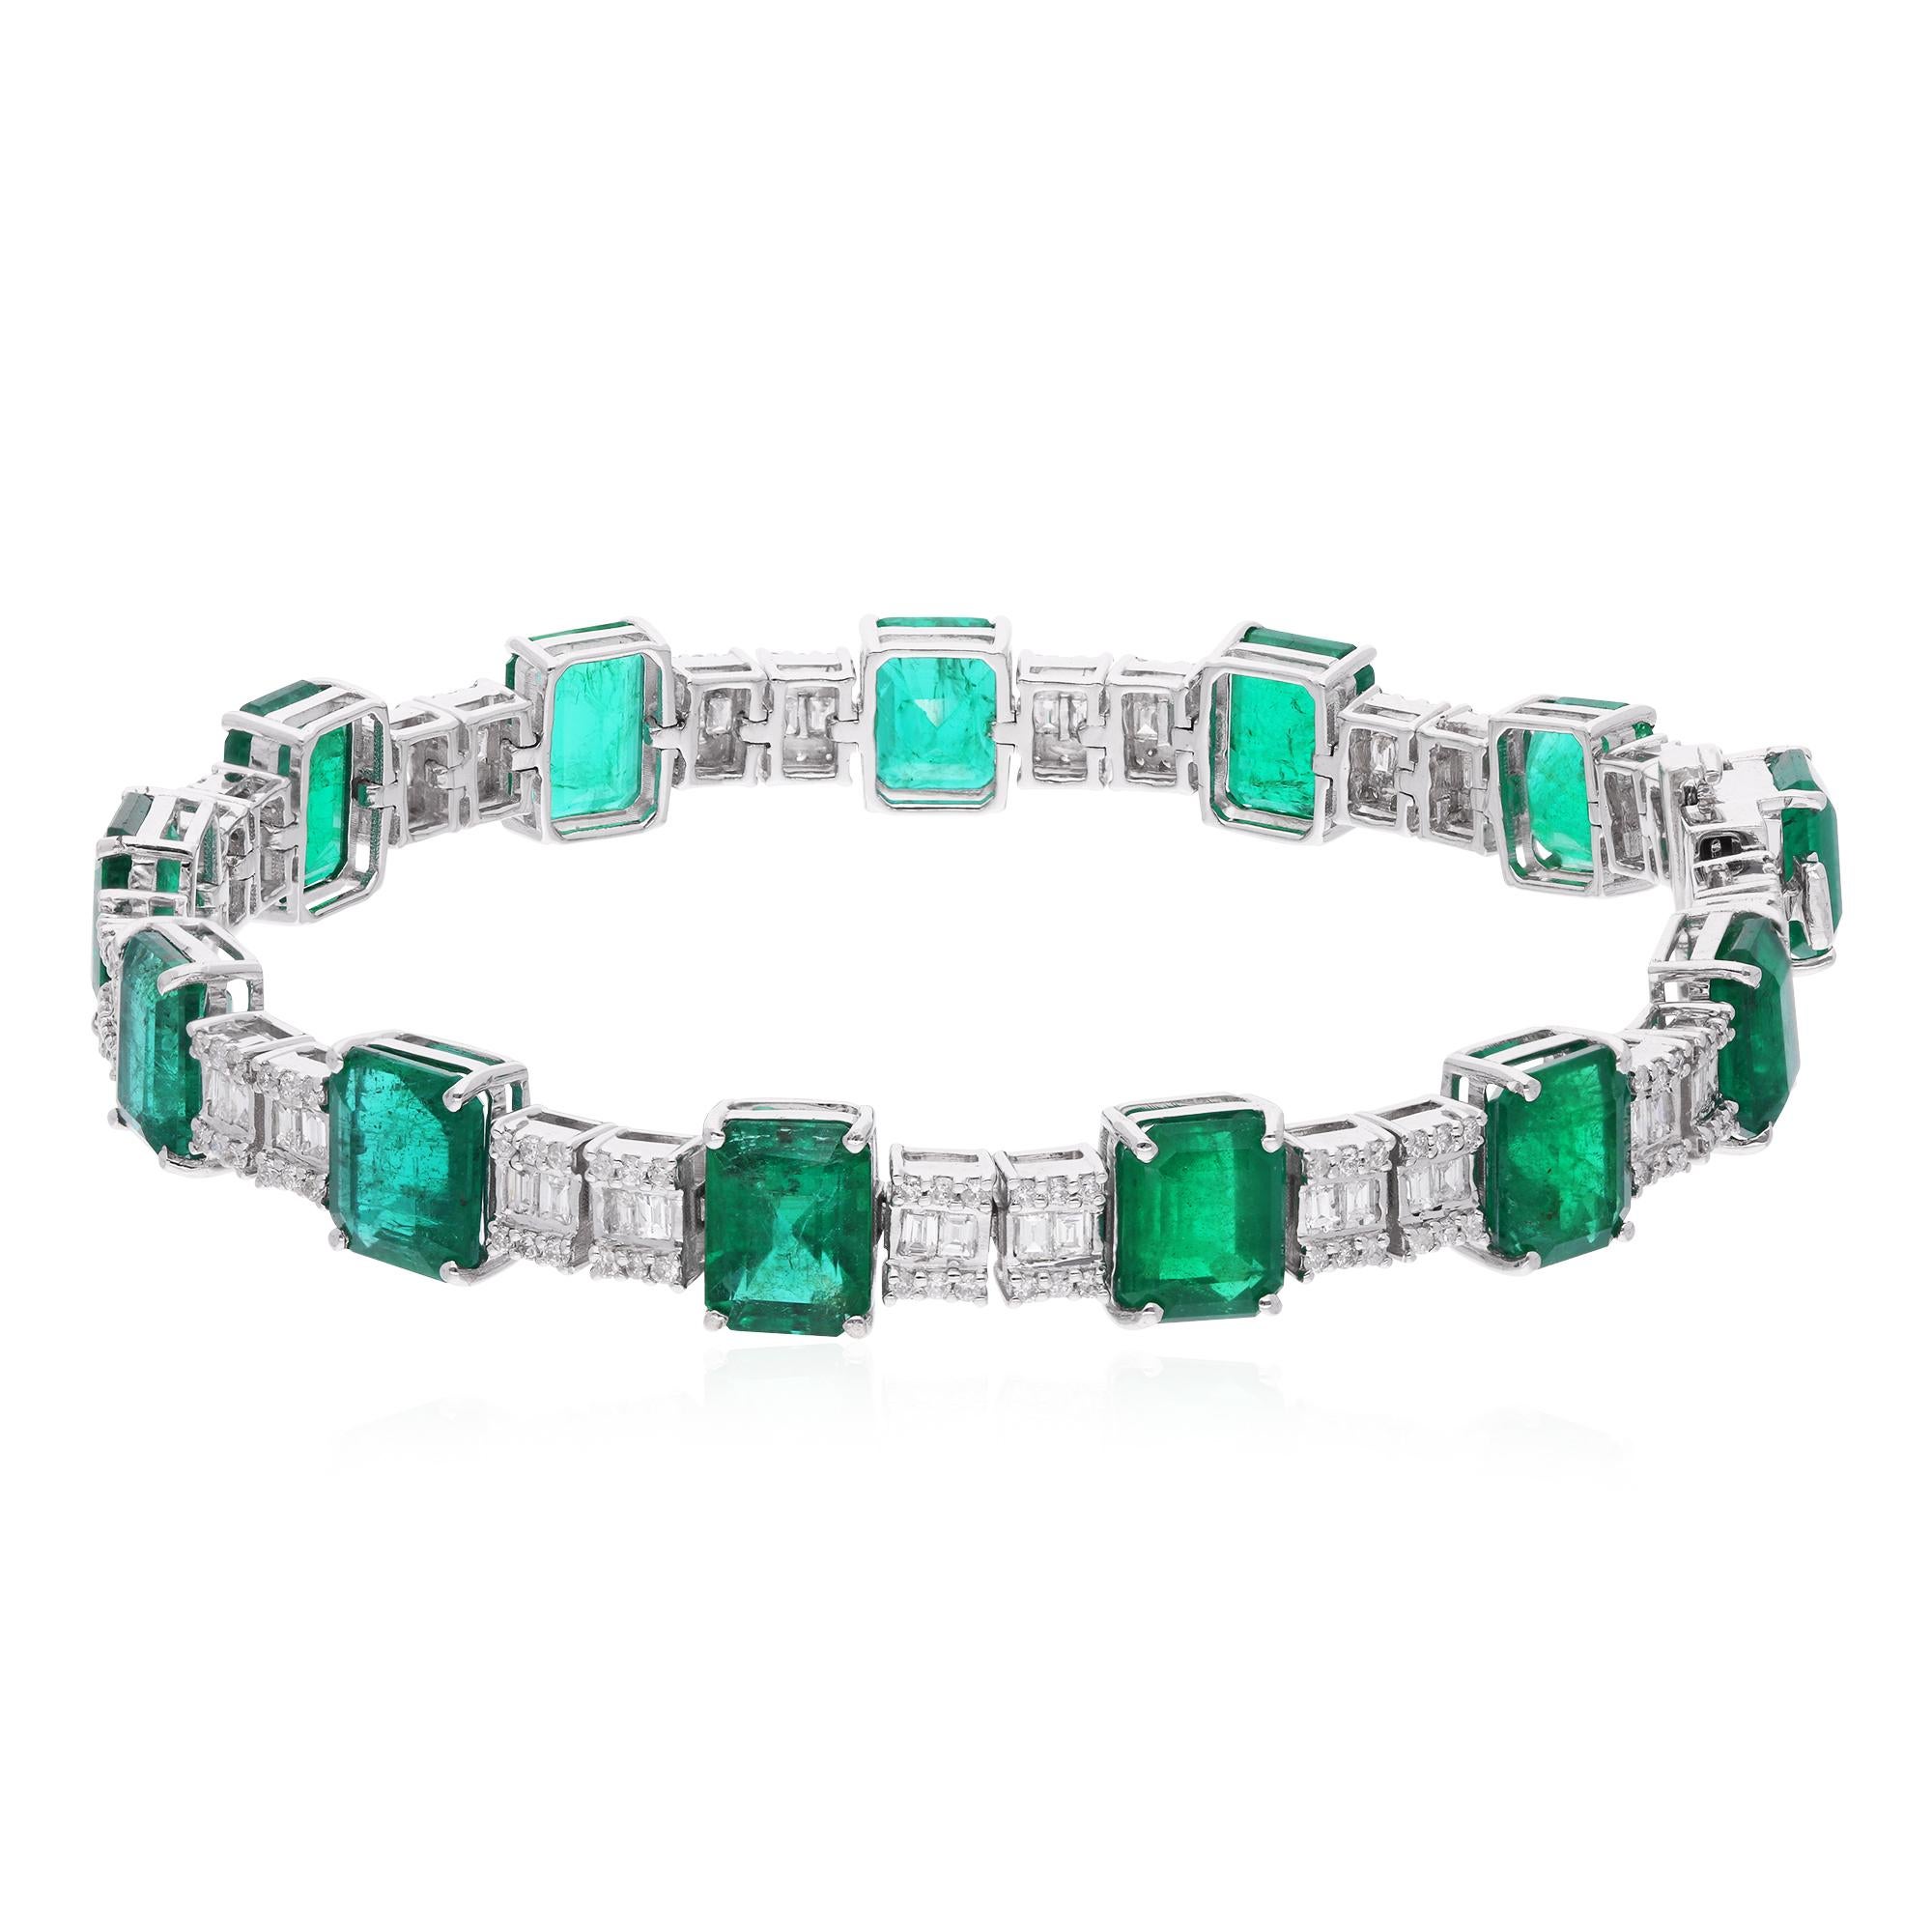 Item Code :- SEBR-42232
Gross Wt. :- 17.91 gm
18k Solid White Gold Wt. :- 14.01 gm
Natural Diamond Wt. :- 1.60 Ct. (AVERAGE DIAMOND CLARITY SI1-SI2 AND COLOR H-I)
Emerald Wt. :- 17.88 Ct.
Bracelet Length :- 7 Inches Long

✦